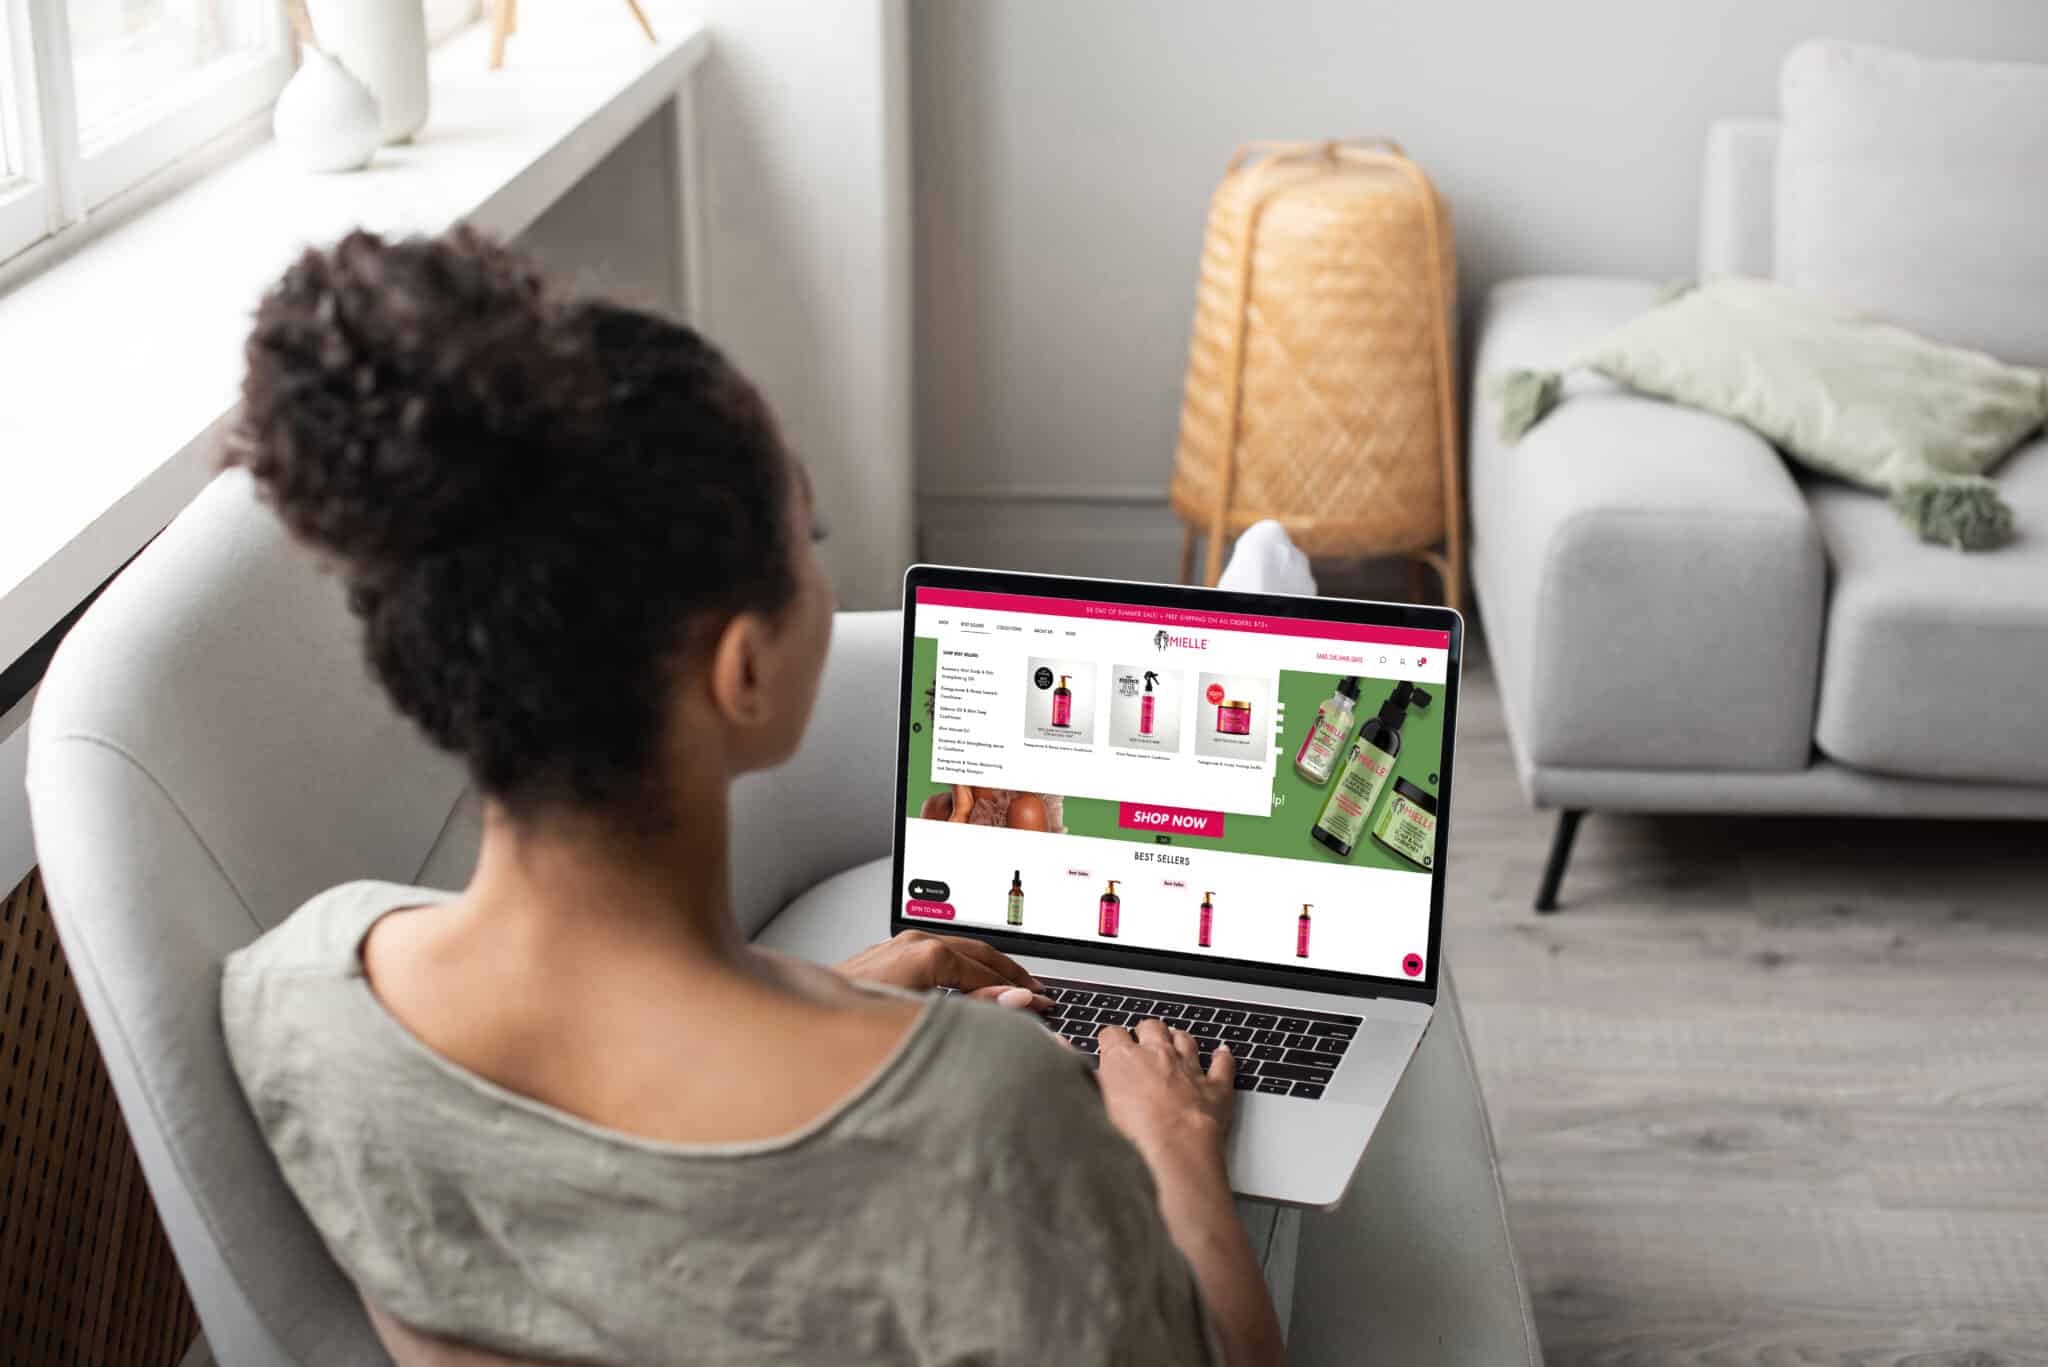 A person with curly hair in a bun is sitting on a white chair, using a laptop, browsing an online shopping website featuring various skincare products from Mielle Organics. The background includes a beige rug, a wicker basket, a light green blanket, and a gray sofa.